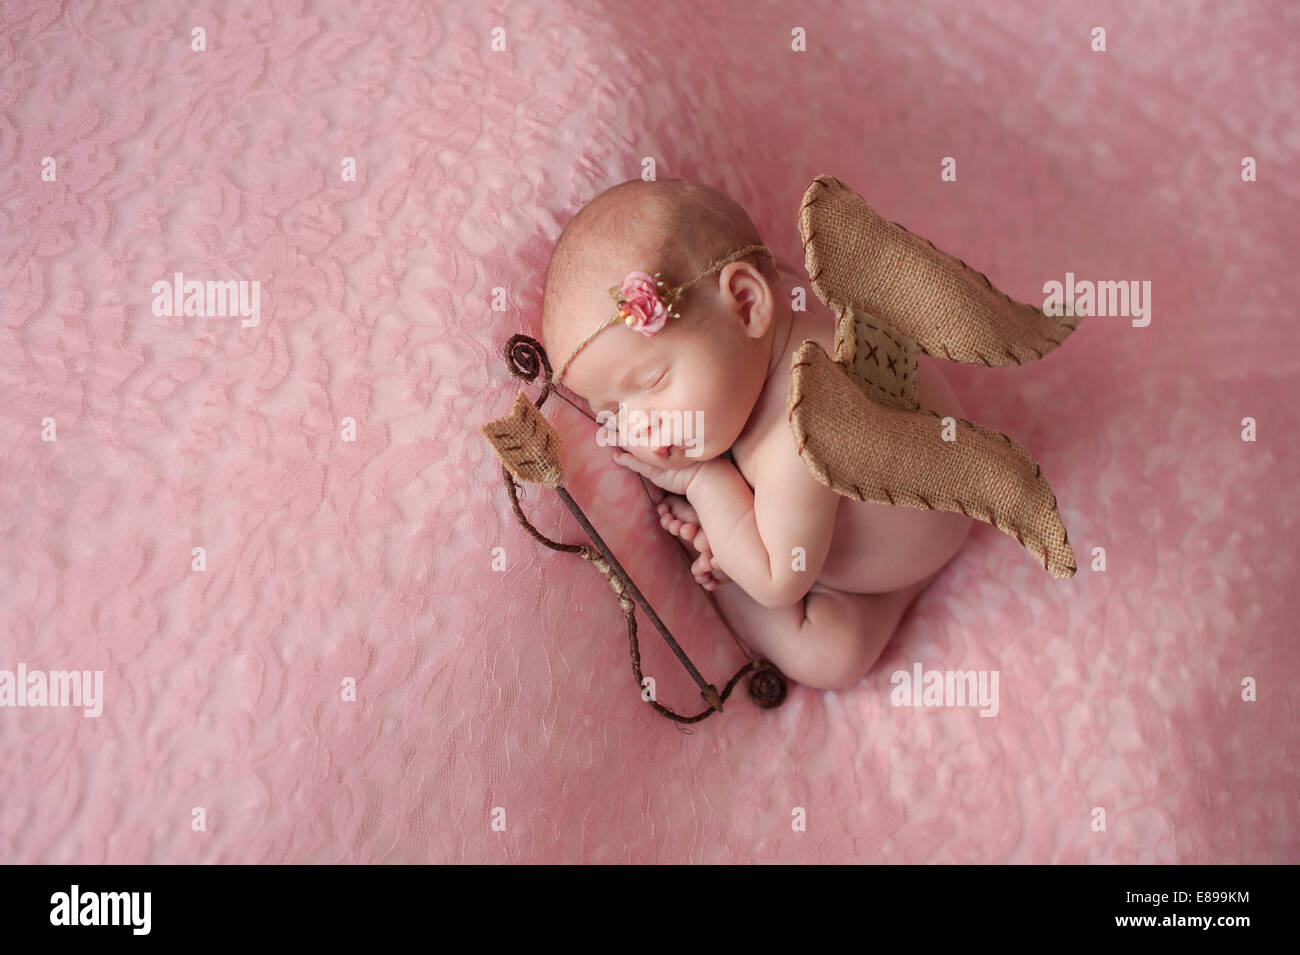 Portrait of a newborn baby girl wearing a Cupid costume. Stock Photo